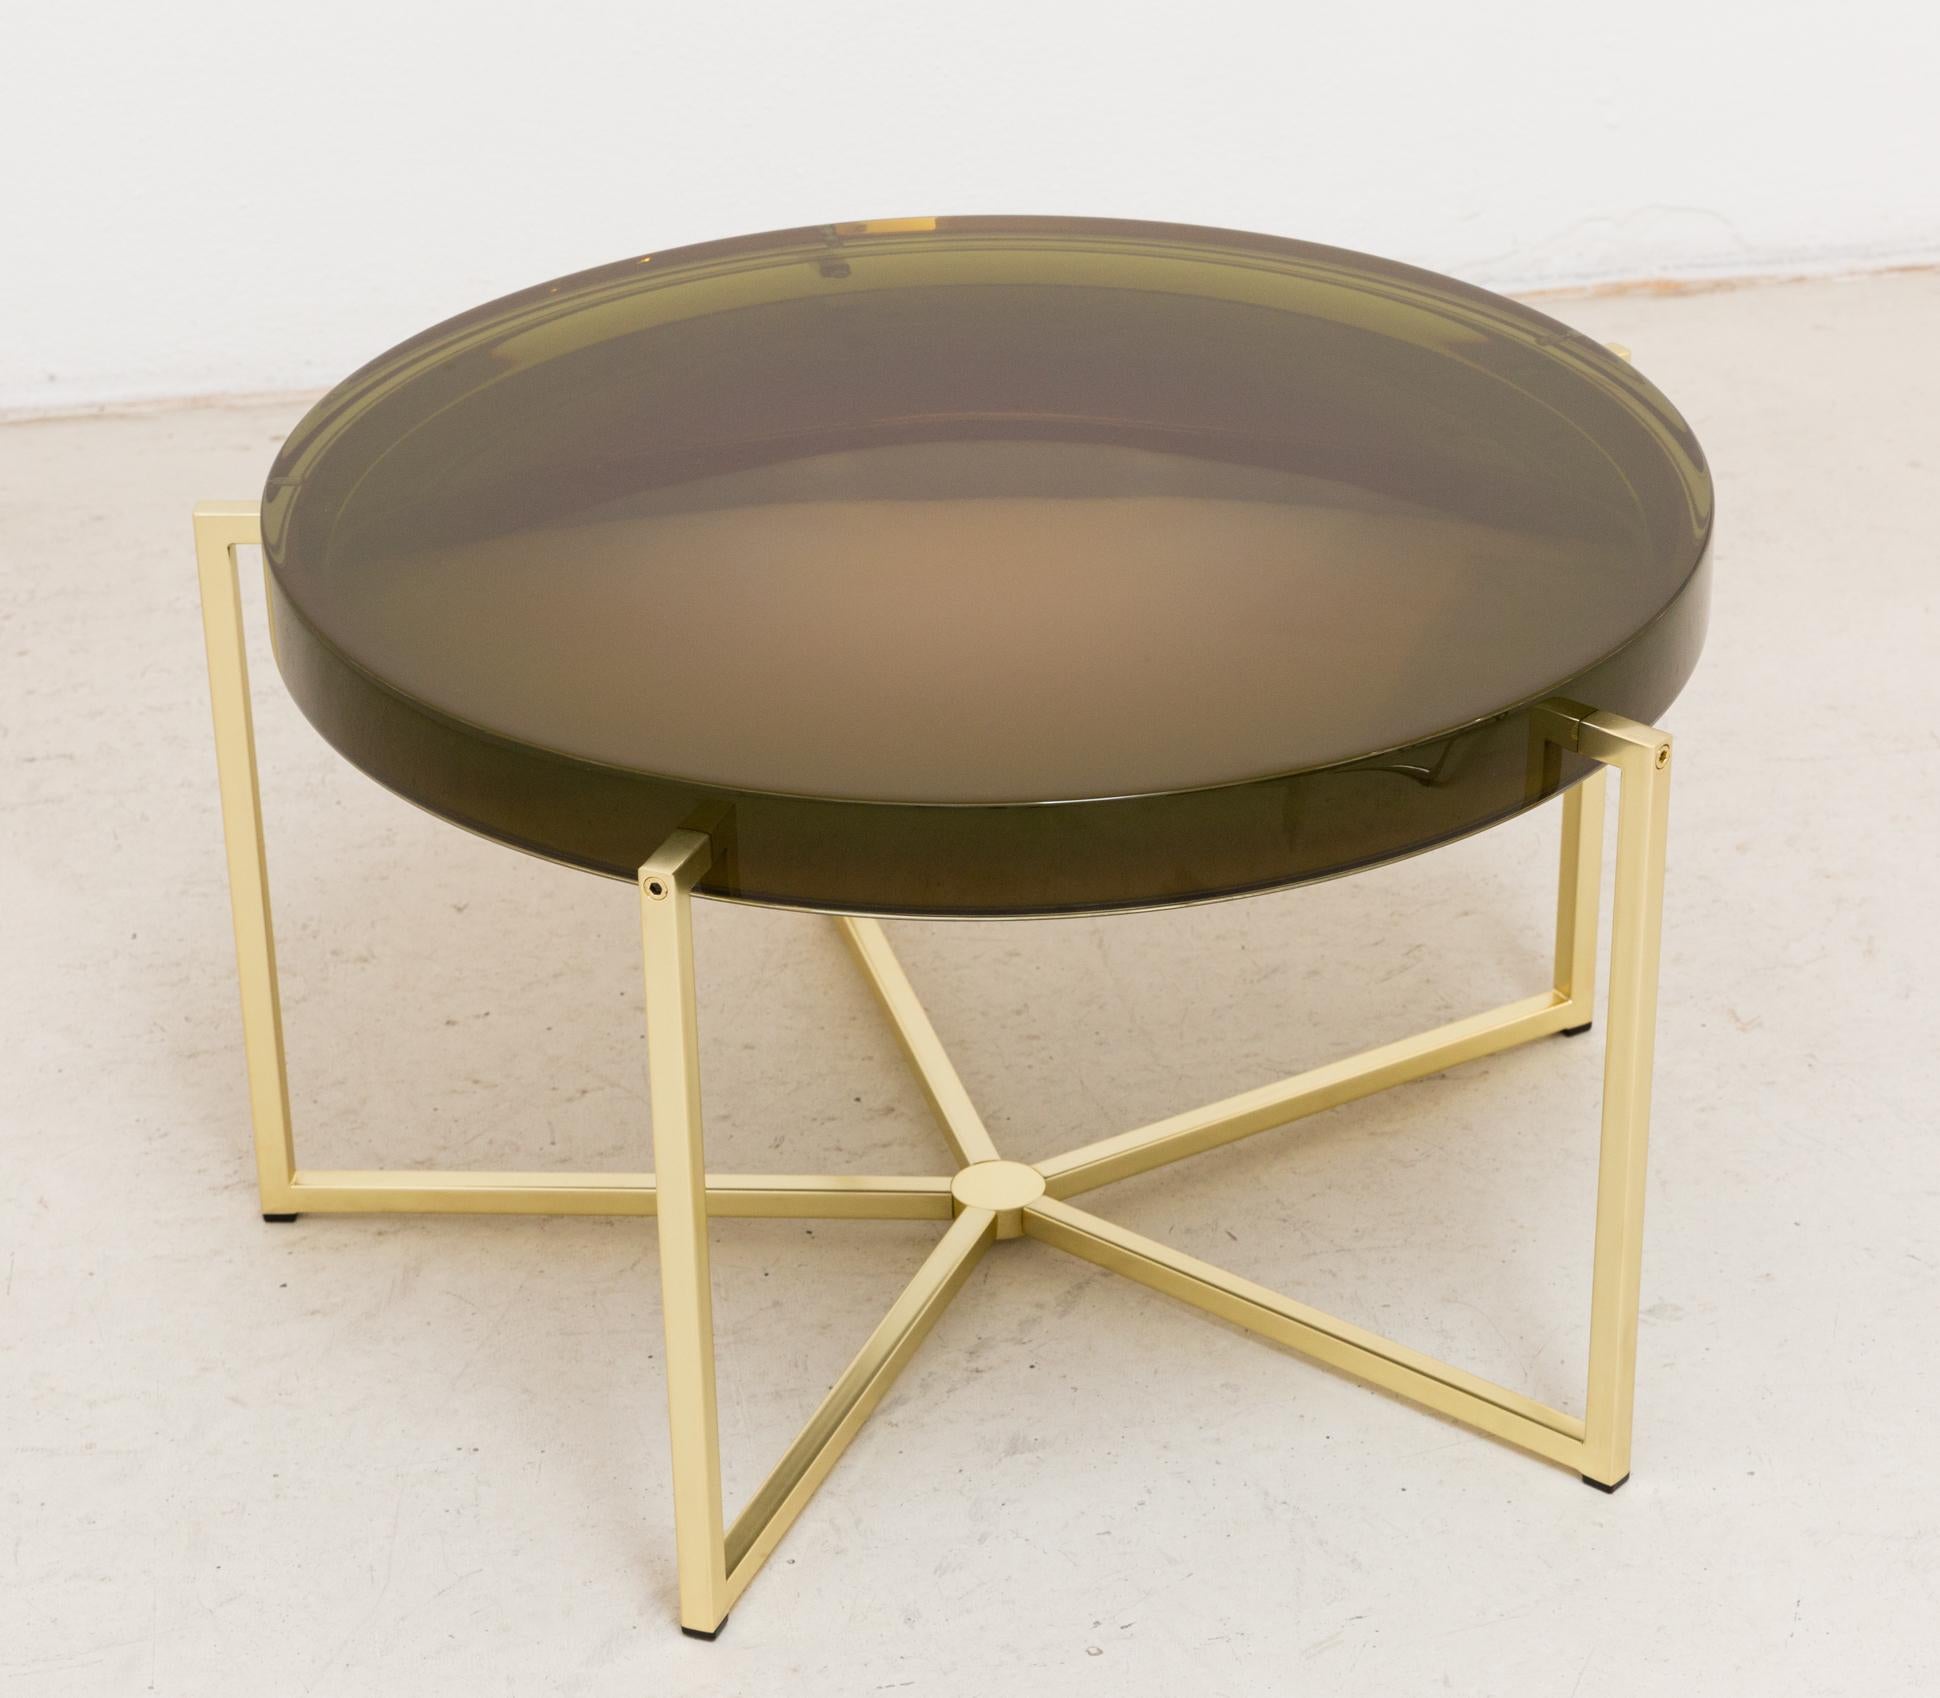 McCollin Bryan Lens table in bottle green. Resin top backed by acrylic mirror on brass base with five legs.